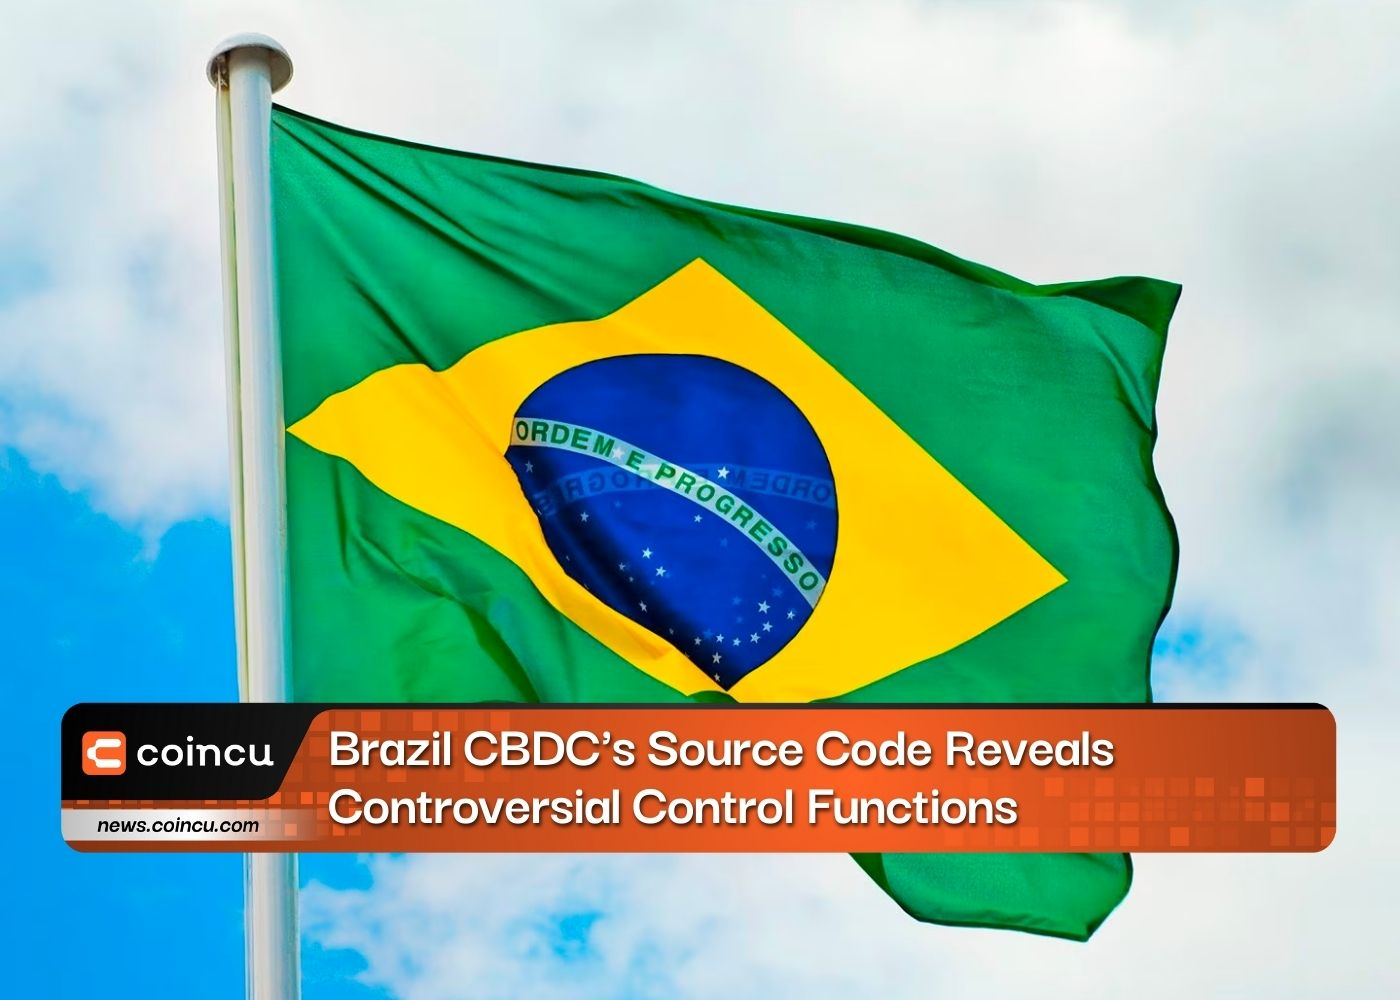 Brazil CBDC's Source Code Reveals Controversial Control Functions